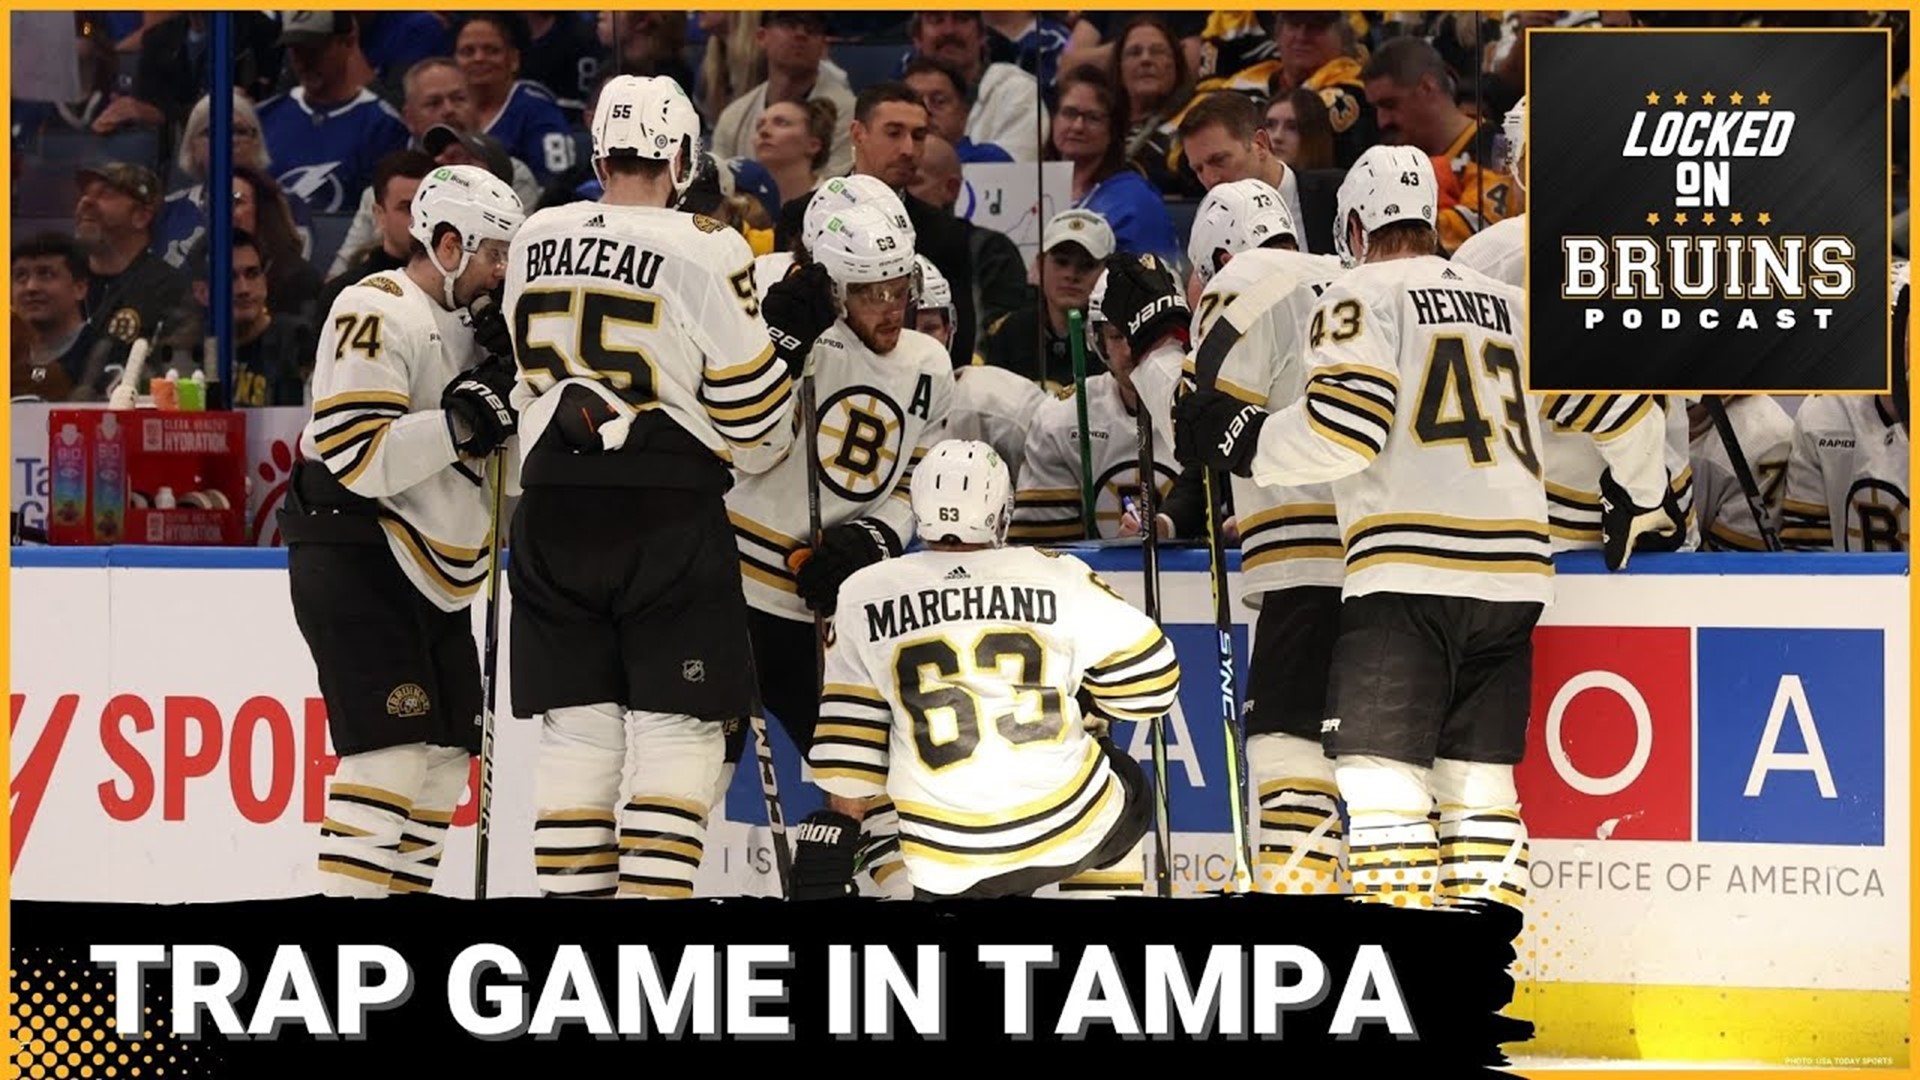 Bruins fall prey to classic trap game in Tampa but can still clinch playoff spot today